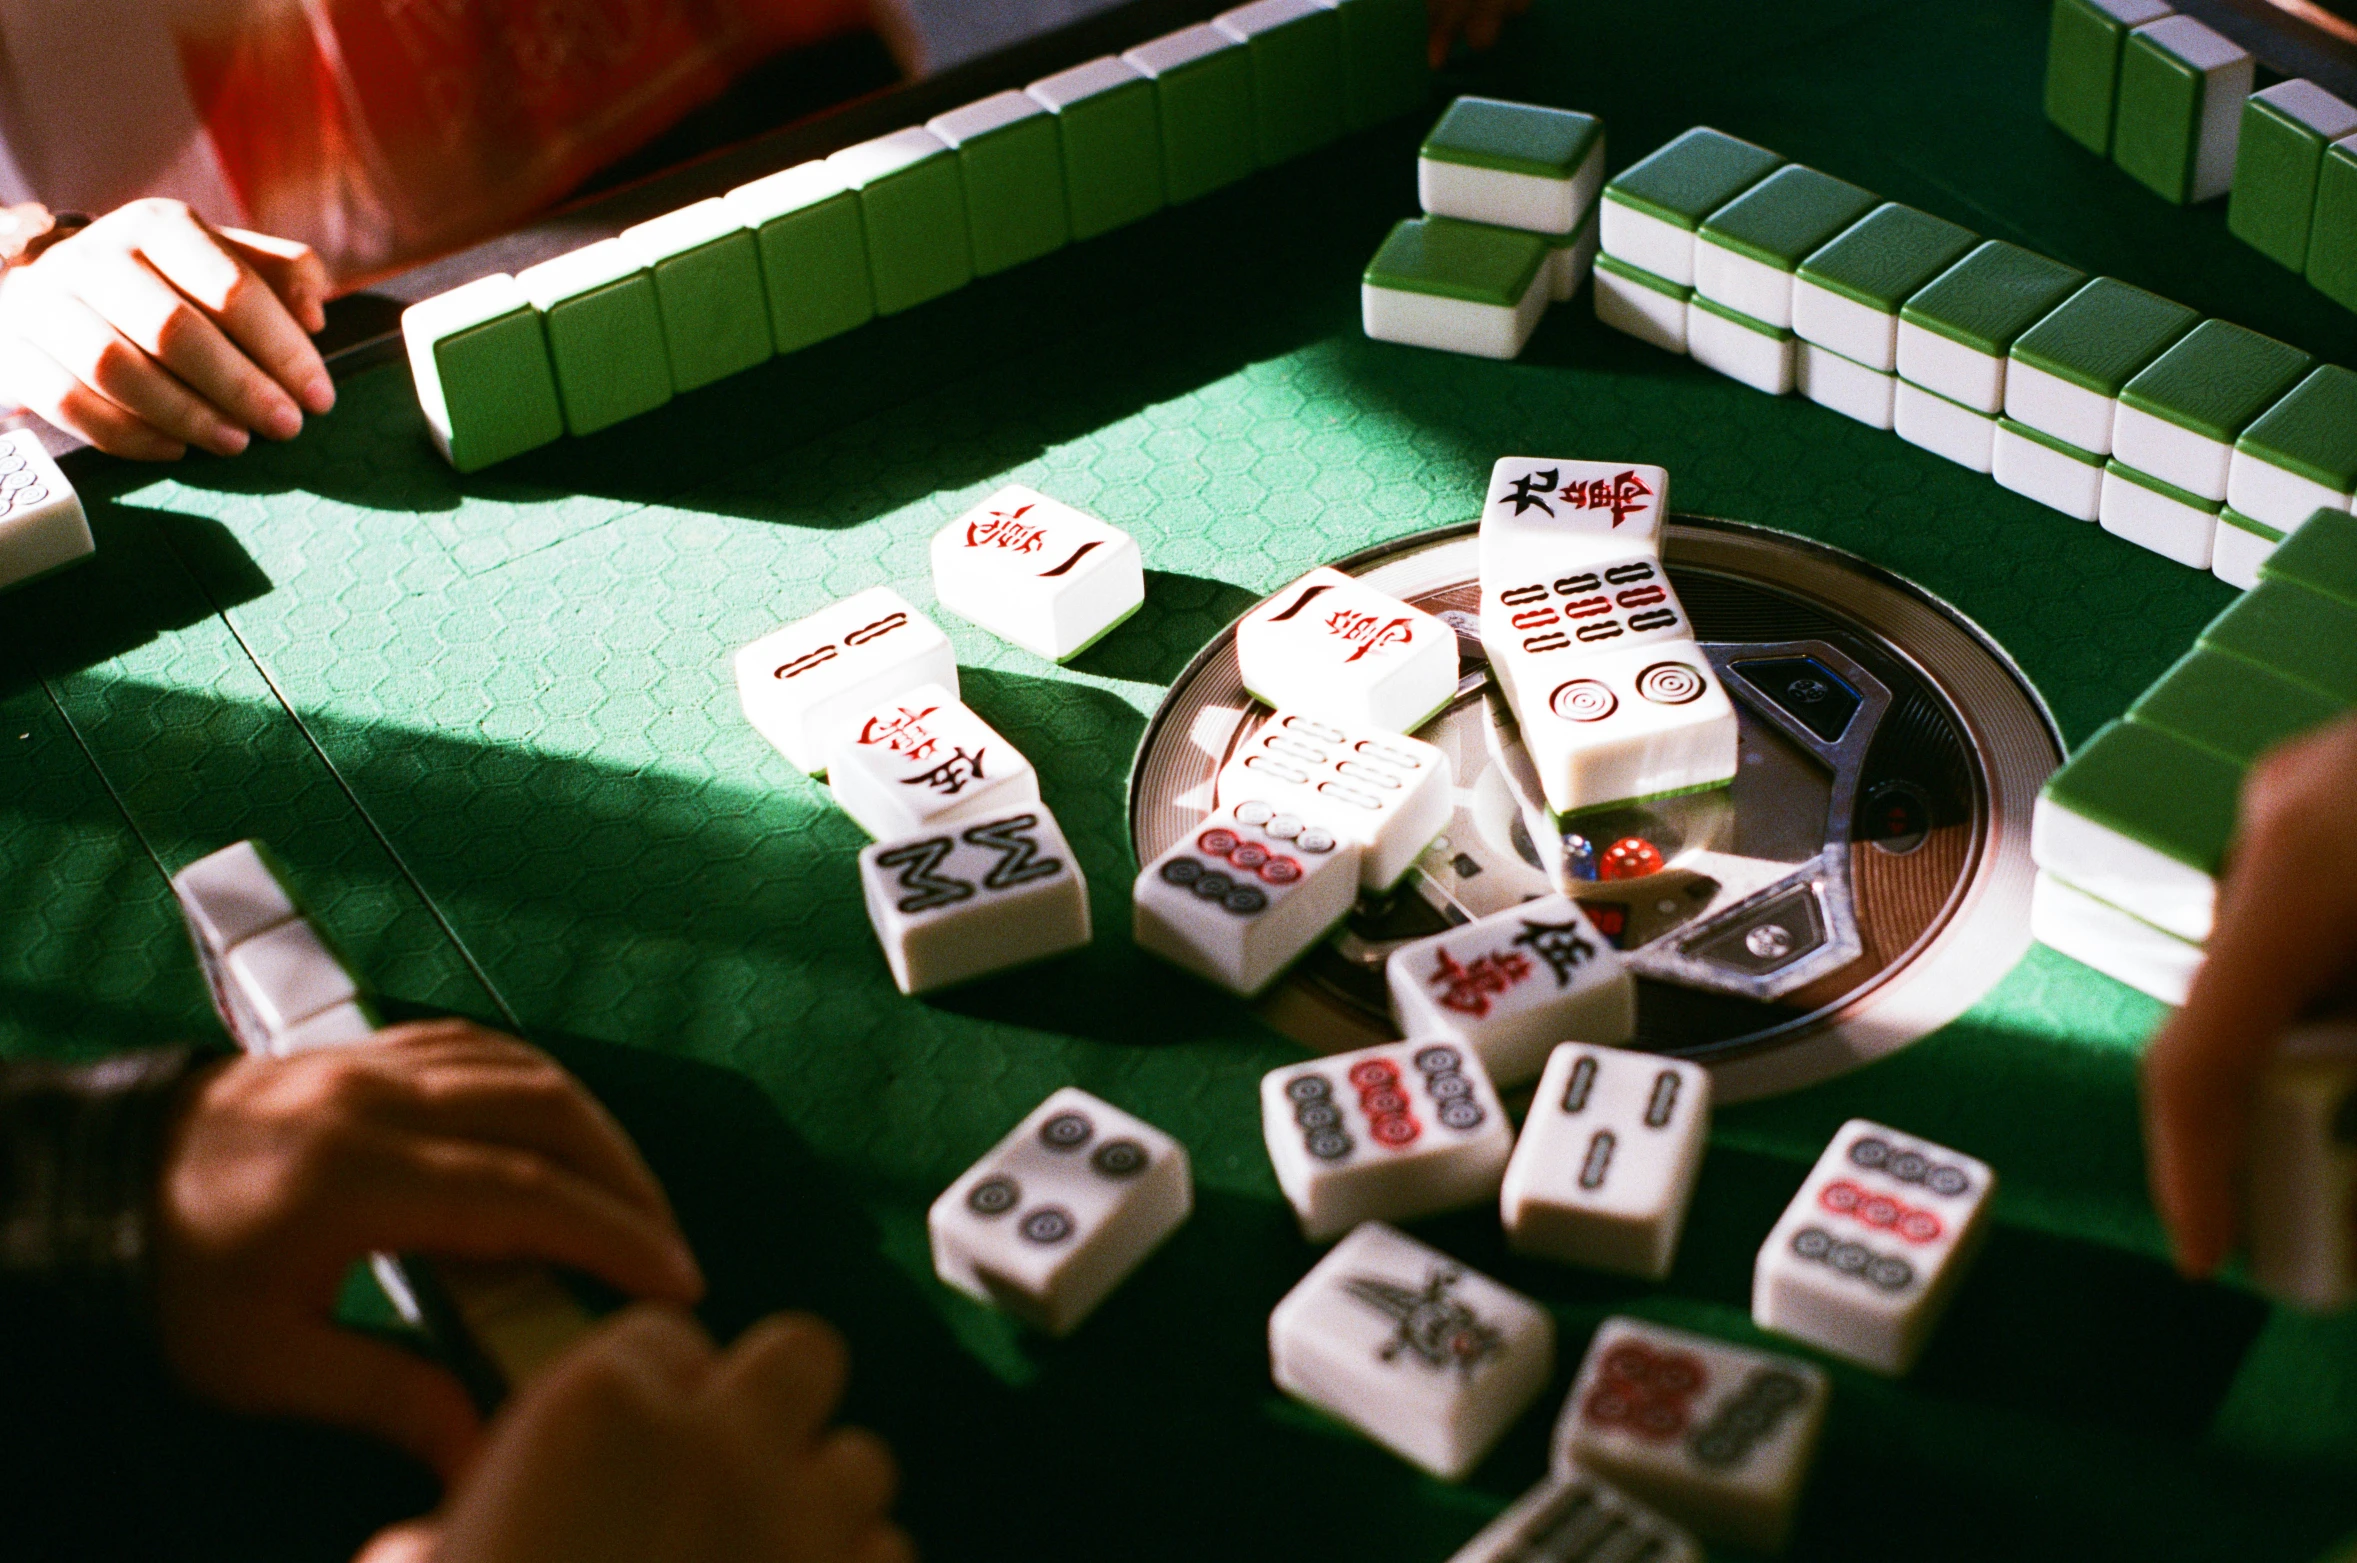 several people are playing with dominos and a gaming table